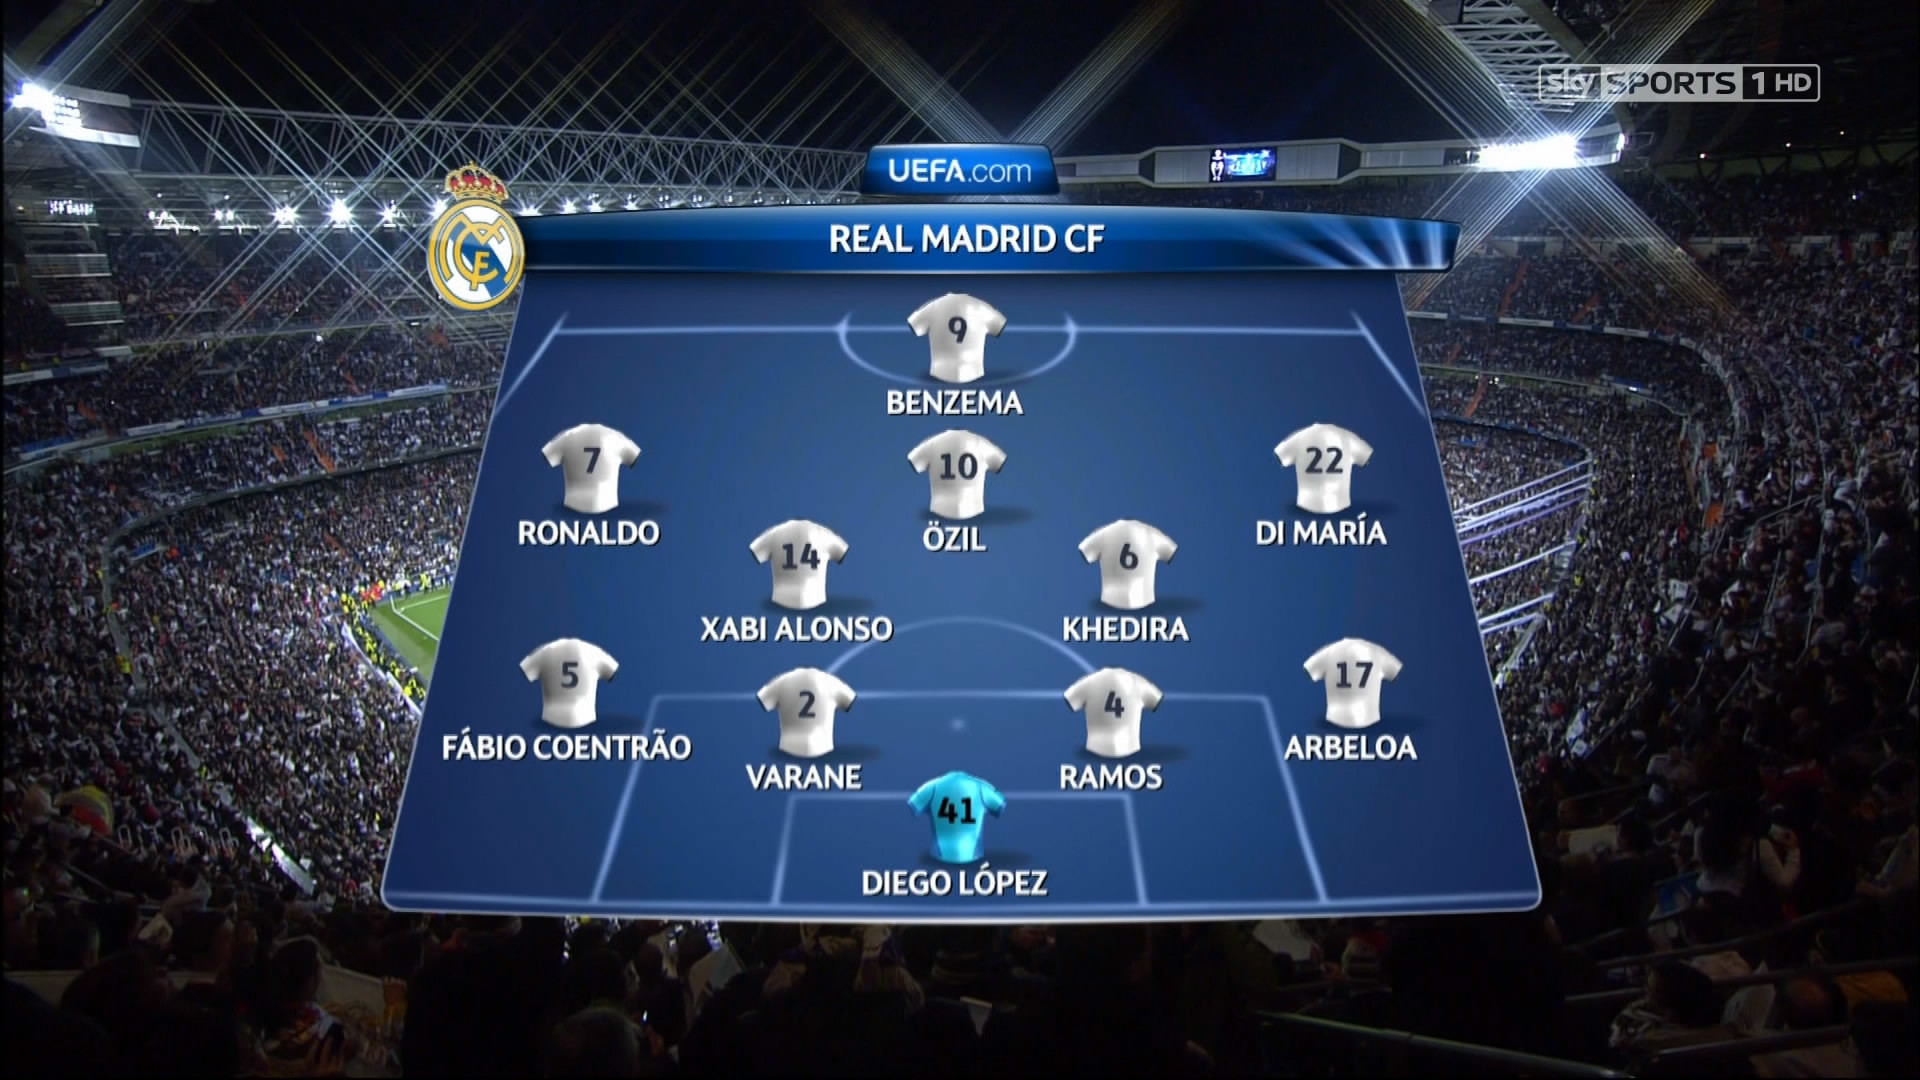 1920x1080 UEFA Champions League - Real Madrid v Manchester United 13-02-2013 - Sky  Sports Highlights HD